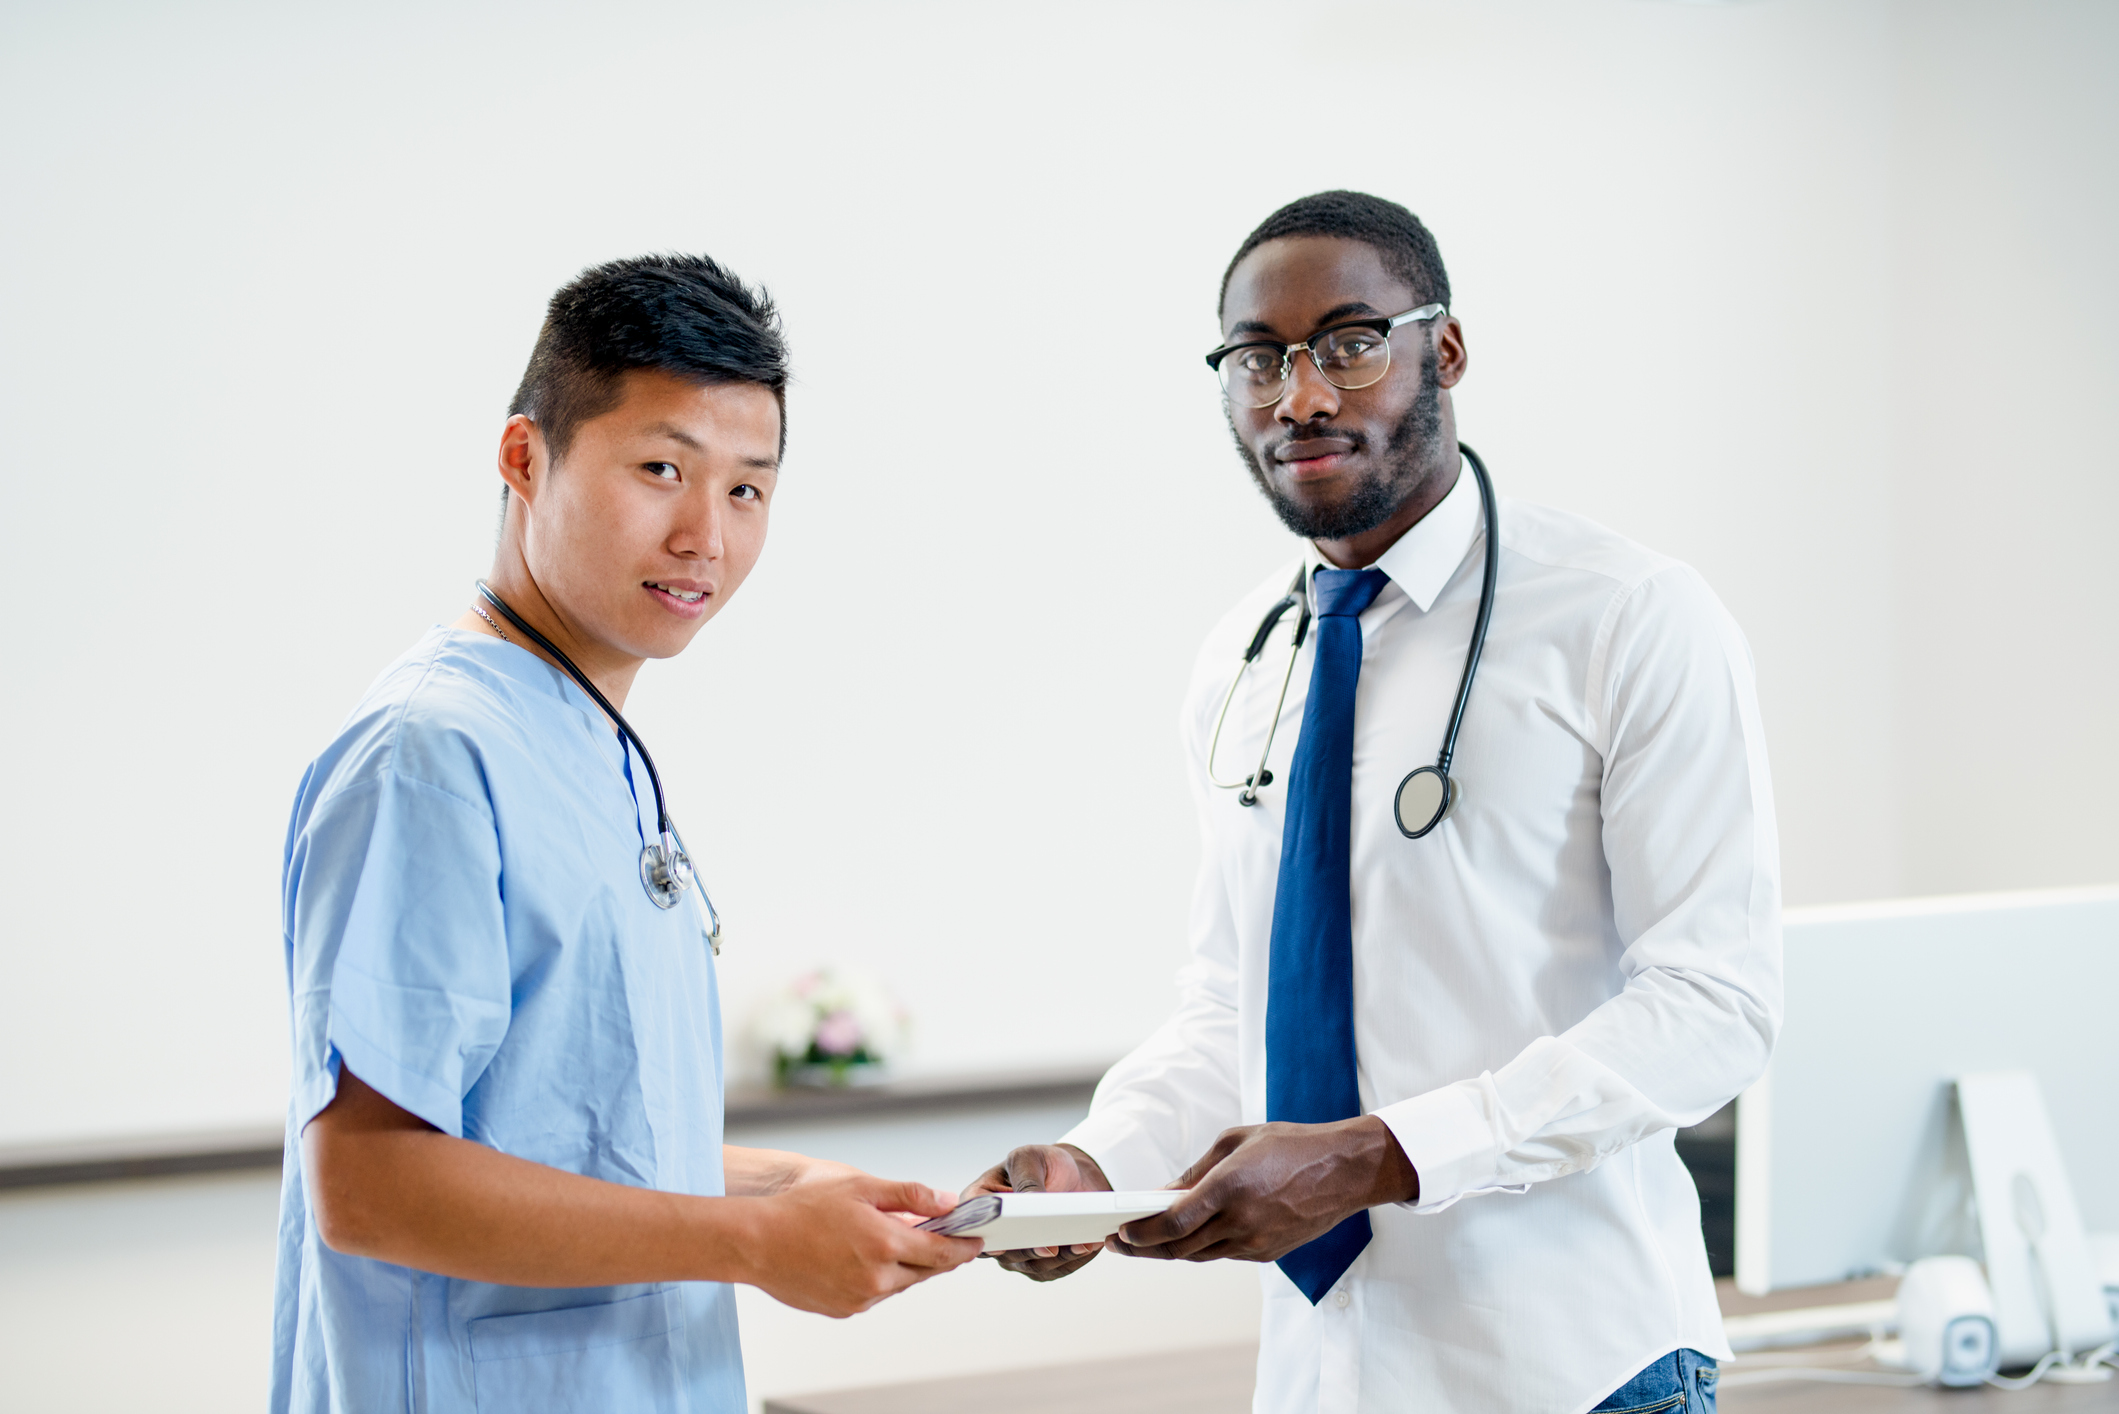 Male Medical Assistant and a Male Doctor holding records